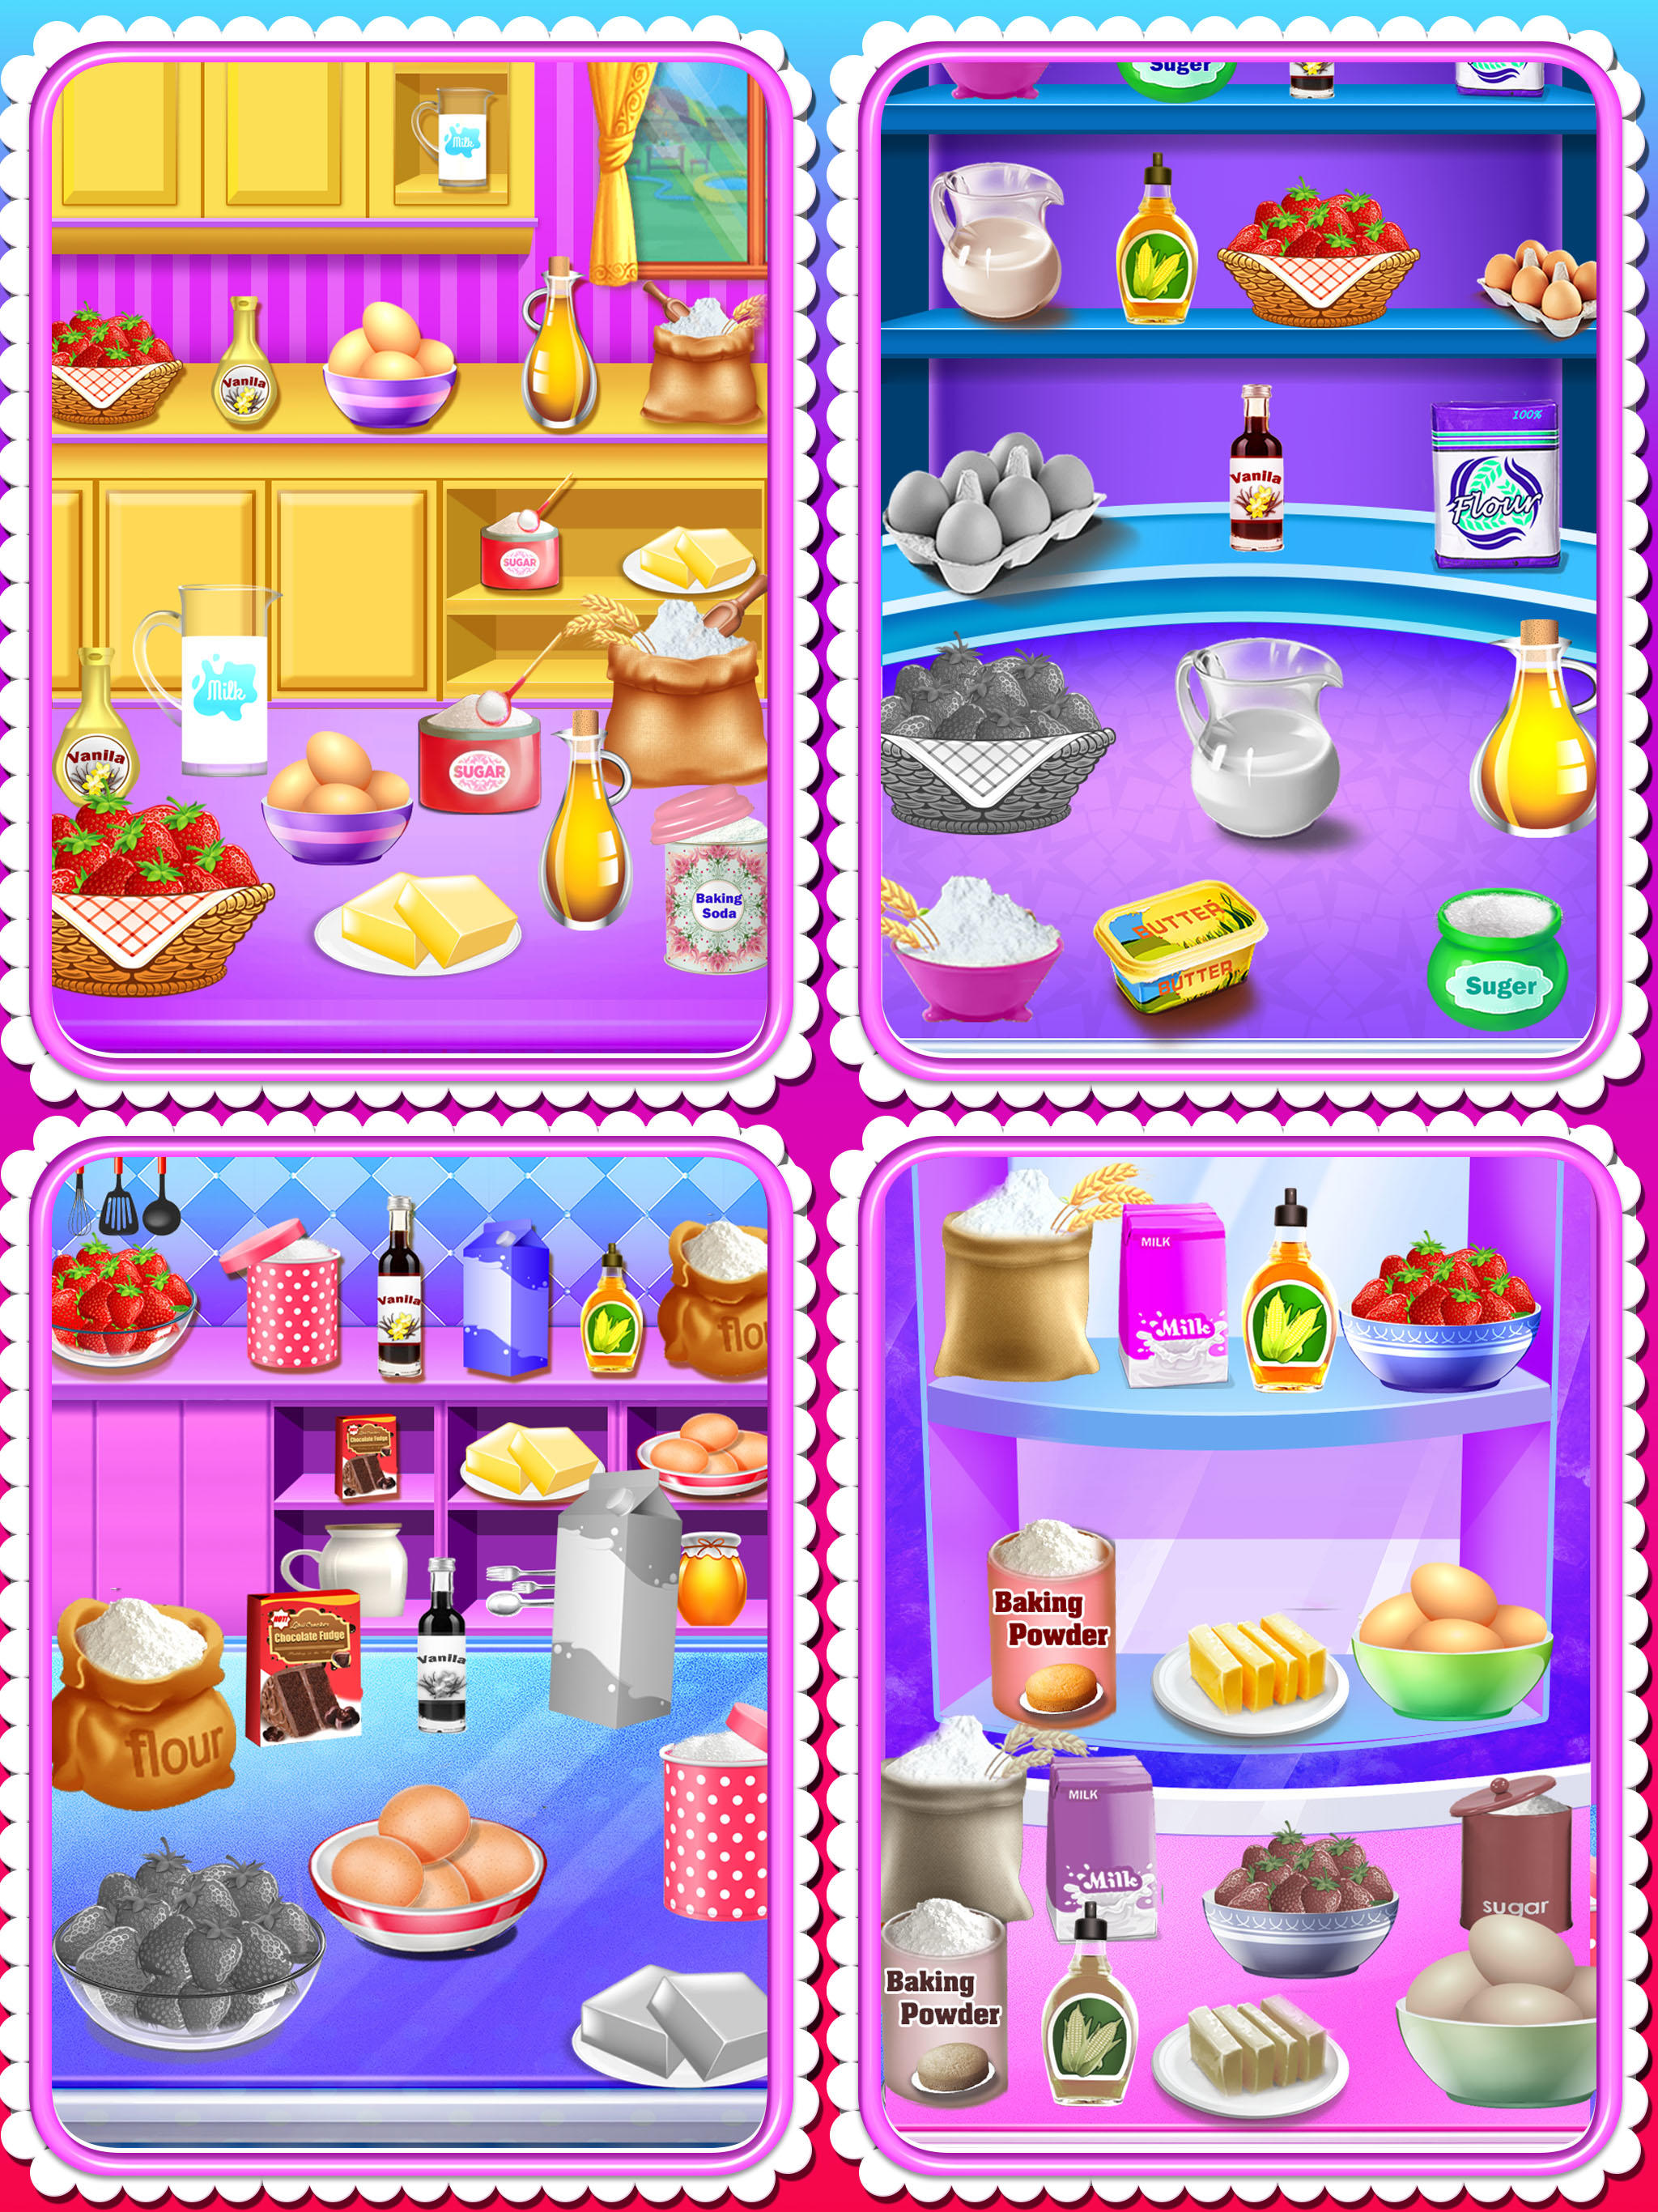 My Cake Maker - Food Making Game for iPhone and Android - YouTube